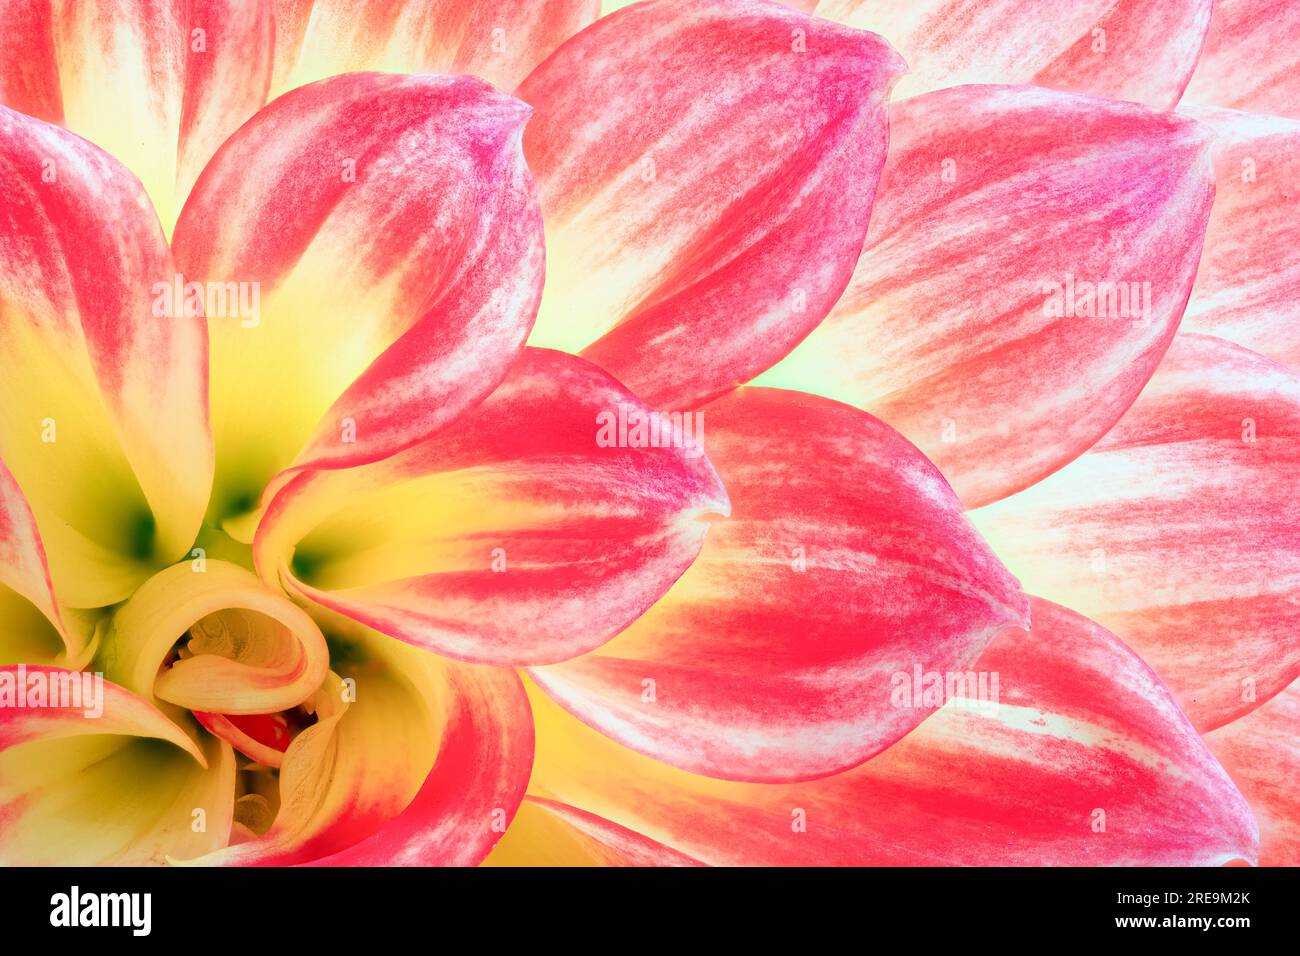 A close-up view of the petals of a beautiful  red and yellow Dahlia flower Stock Photo